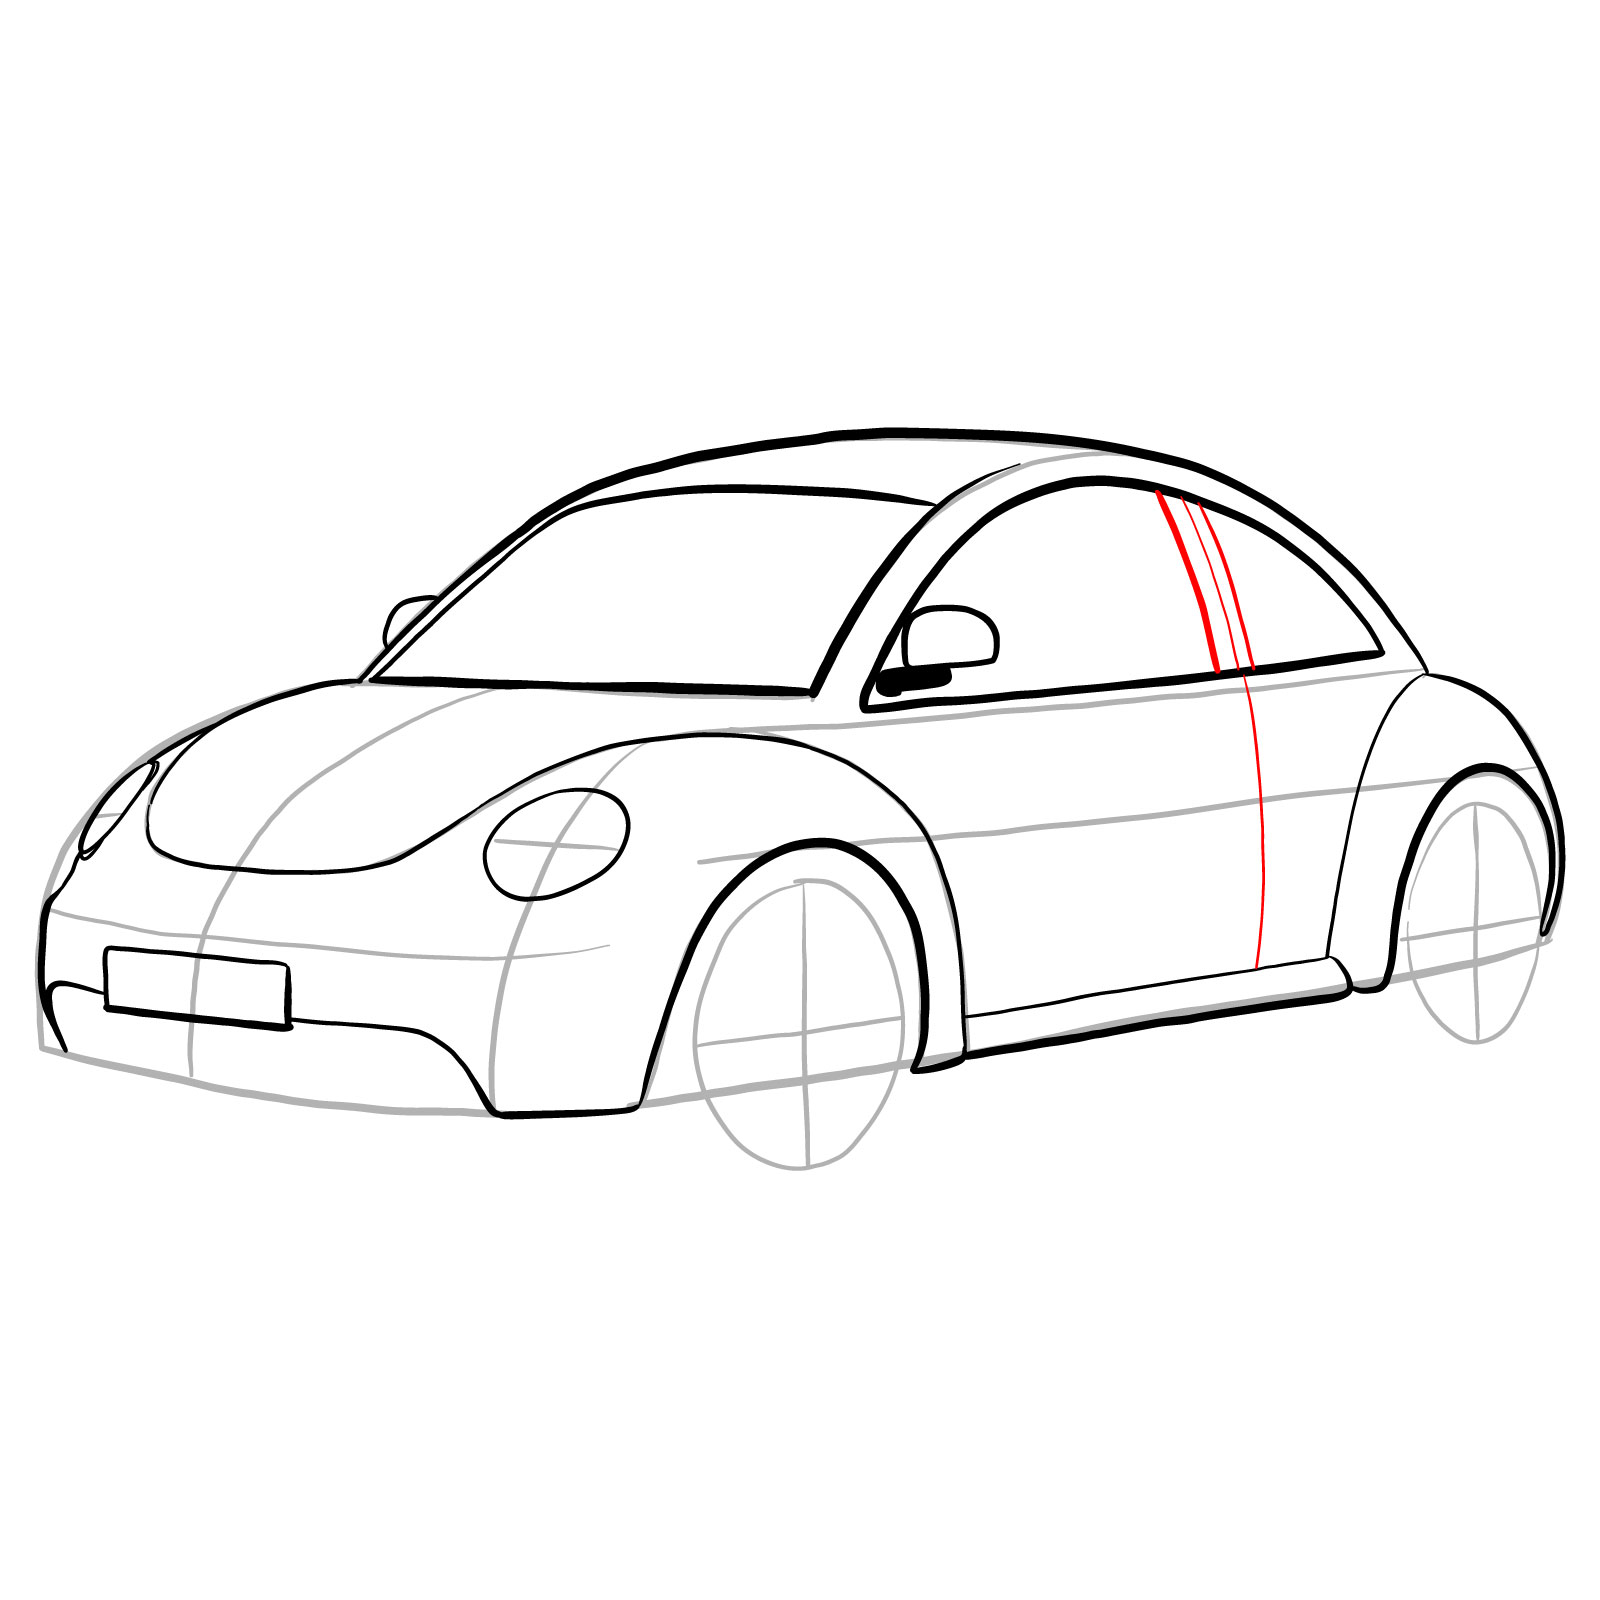 How to draw Volkswagen New Beetle - step 19